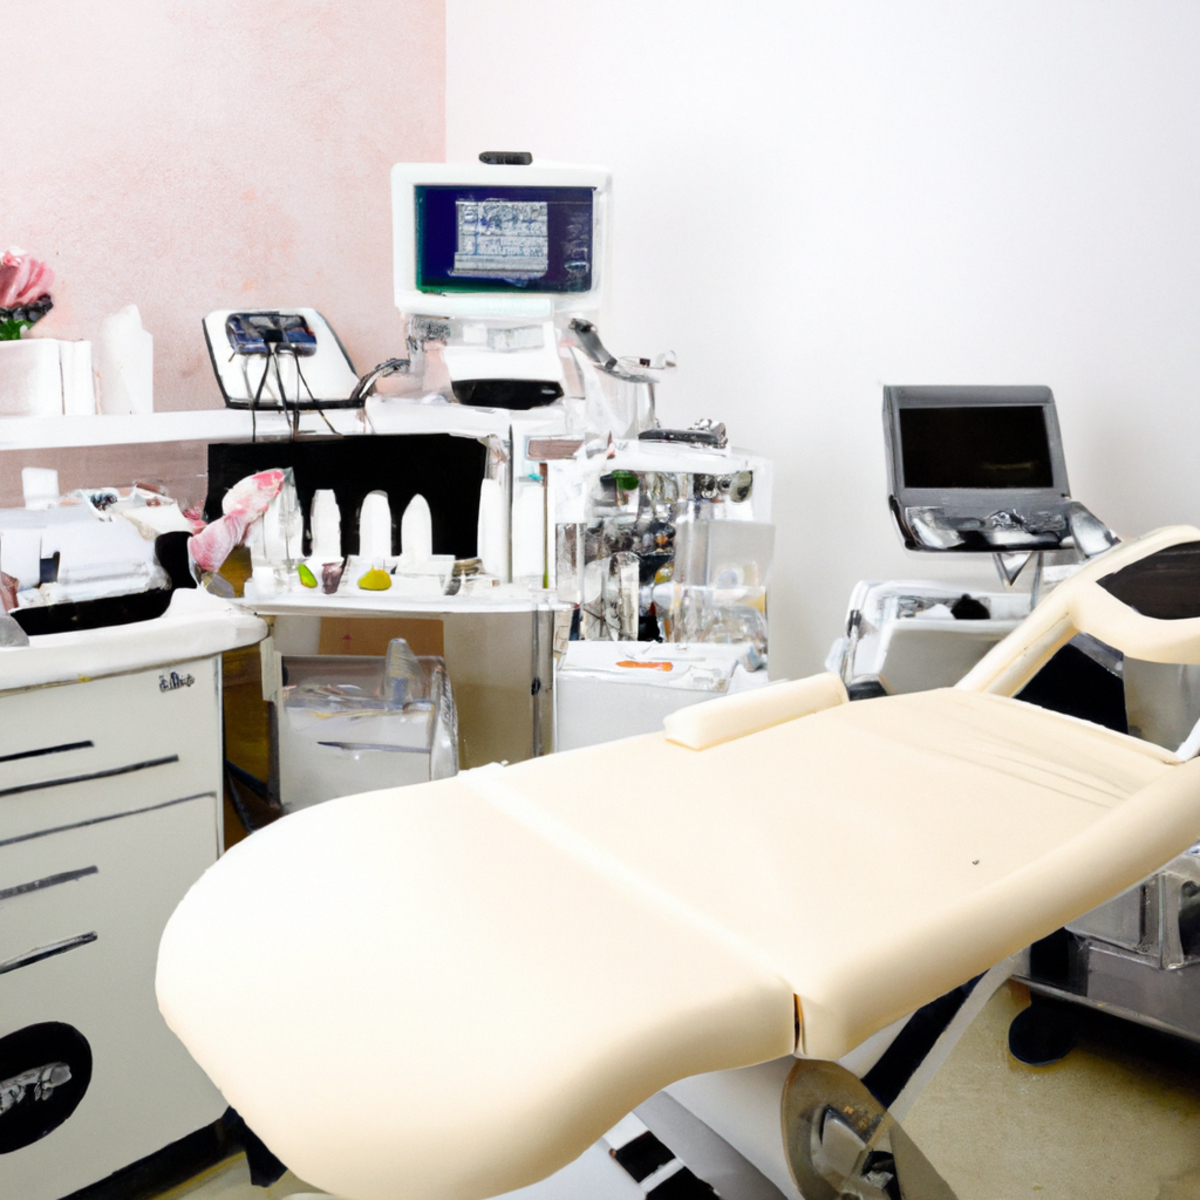 Revolutionary anti-aging clinic with modern equipment, skincare products, and a touch of nature.